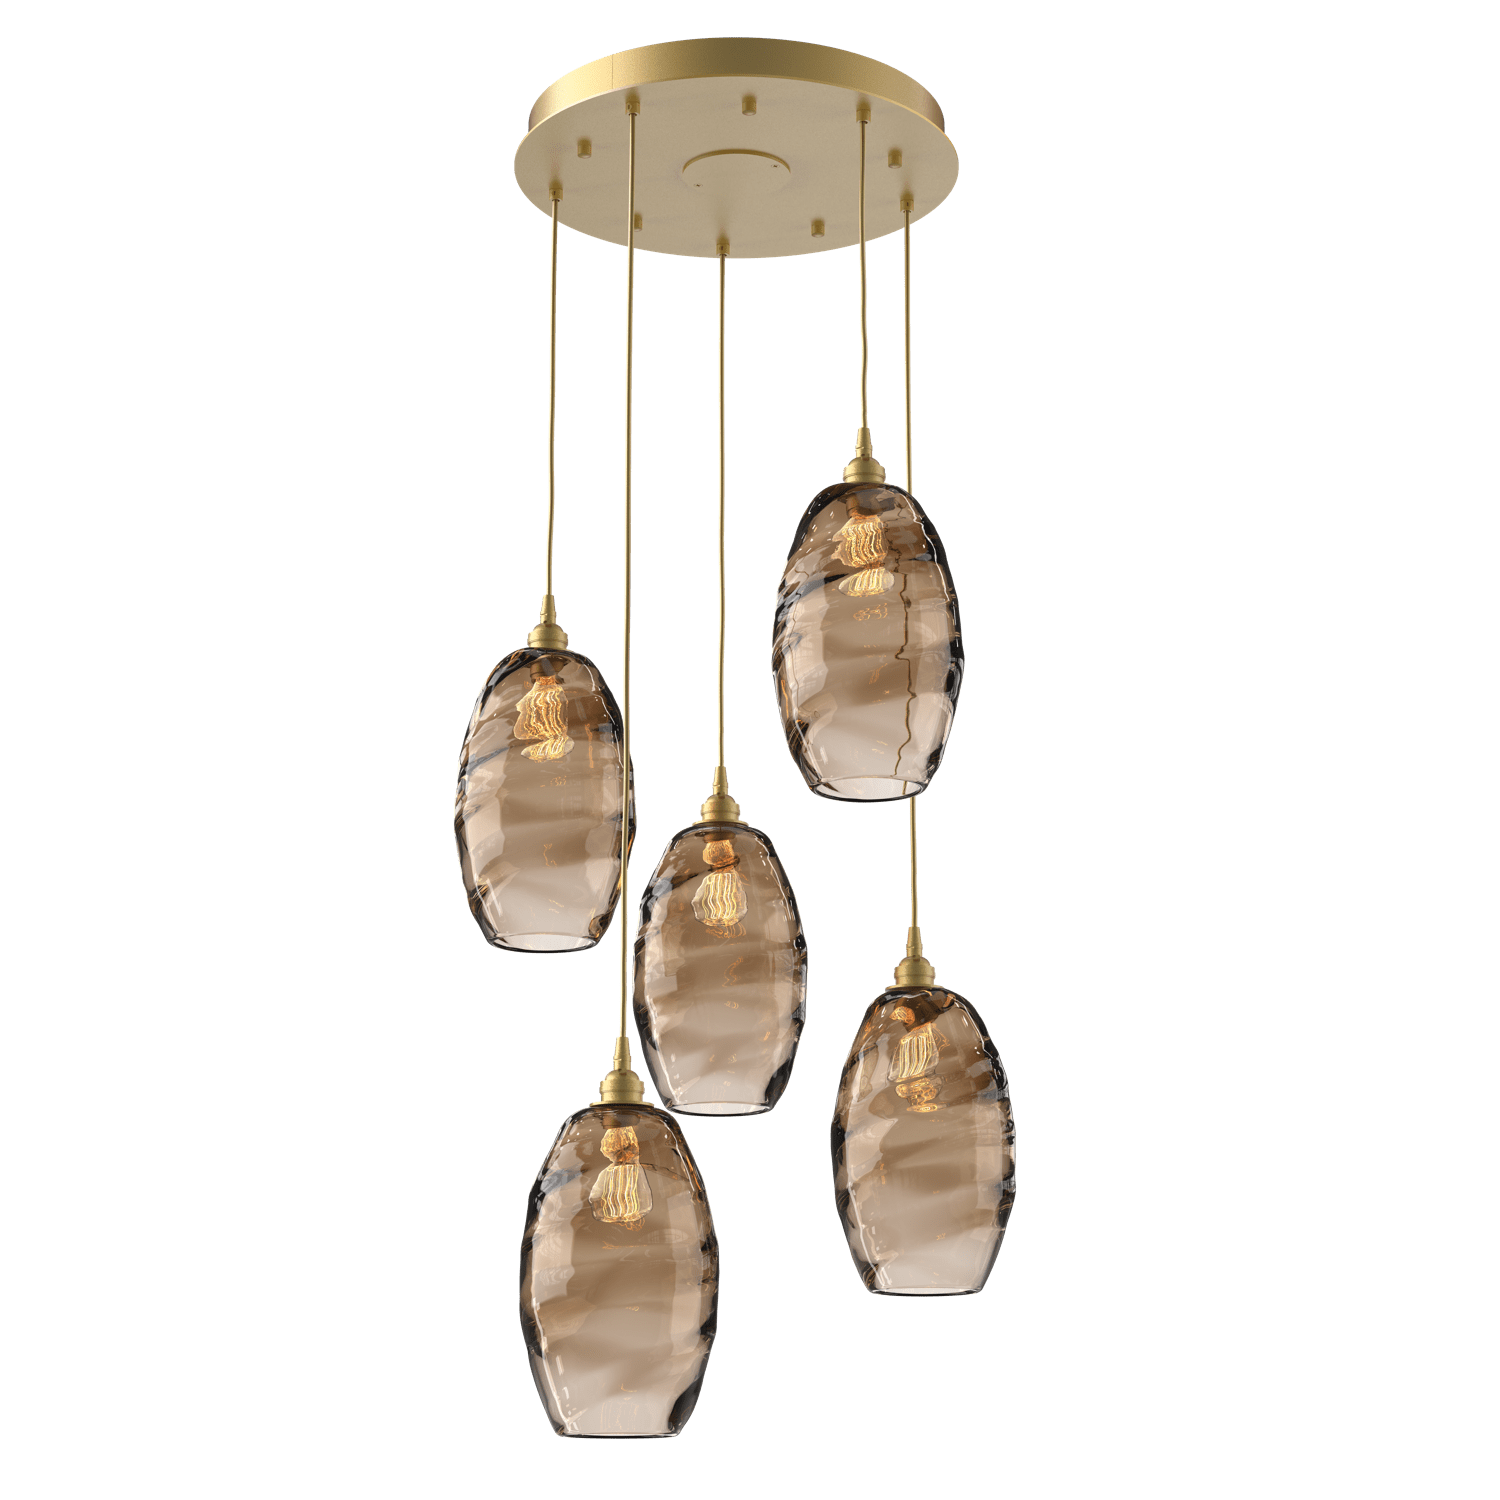 CHB0035-05-GB-OB-Hammerton-Studio-Optic-Blown-Glass-Elisse-5-light-round-pendant-chandelier-with-gilded-brass-finish-and-optic-bronze-blown-glass-shades-and-incandescent-lamping